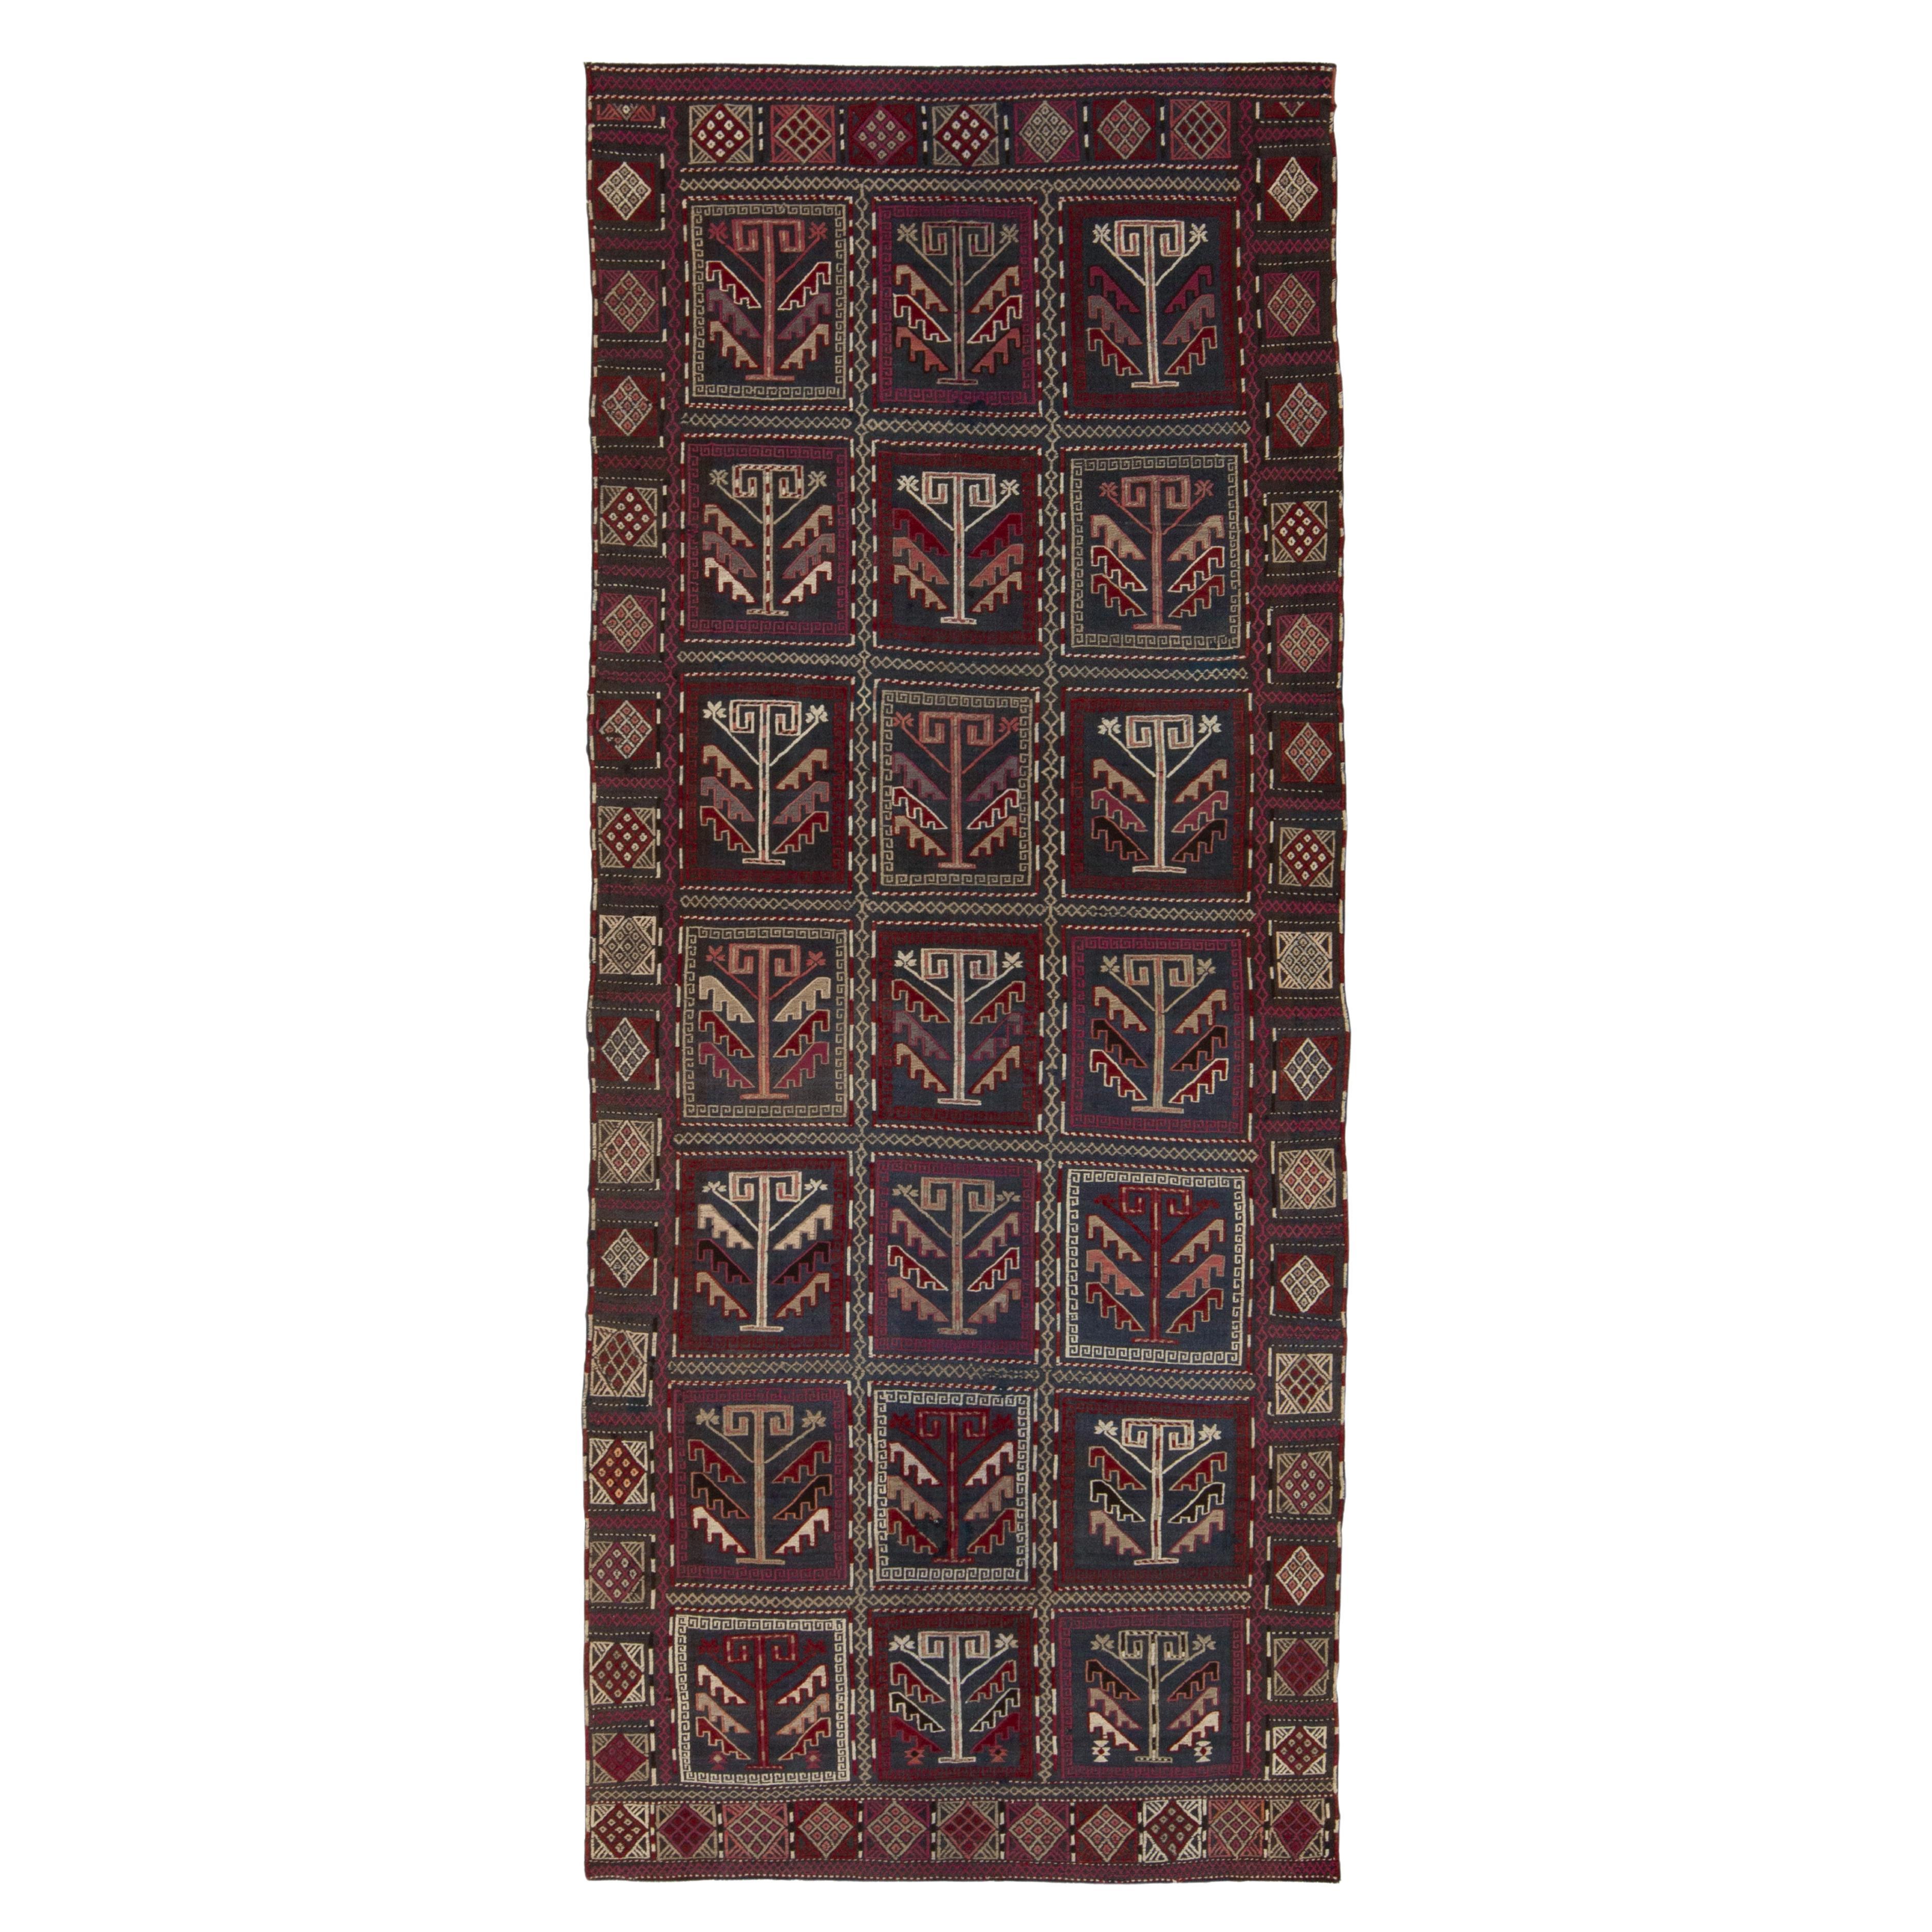 Antique RussianKilim Rug in Blue Embroidered Geometric Pattern by Rug & Kilim